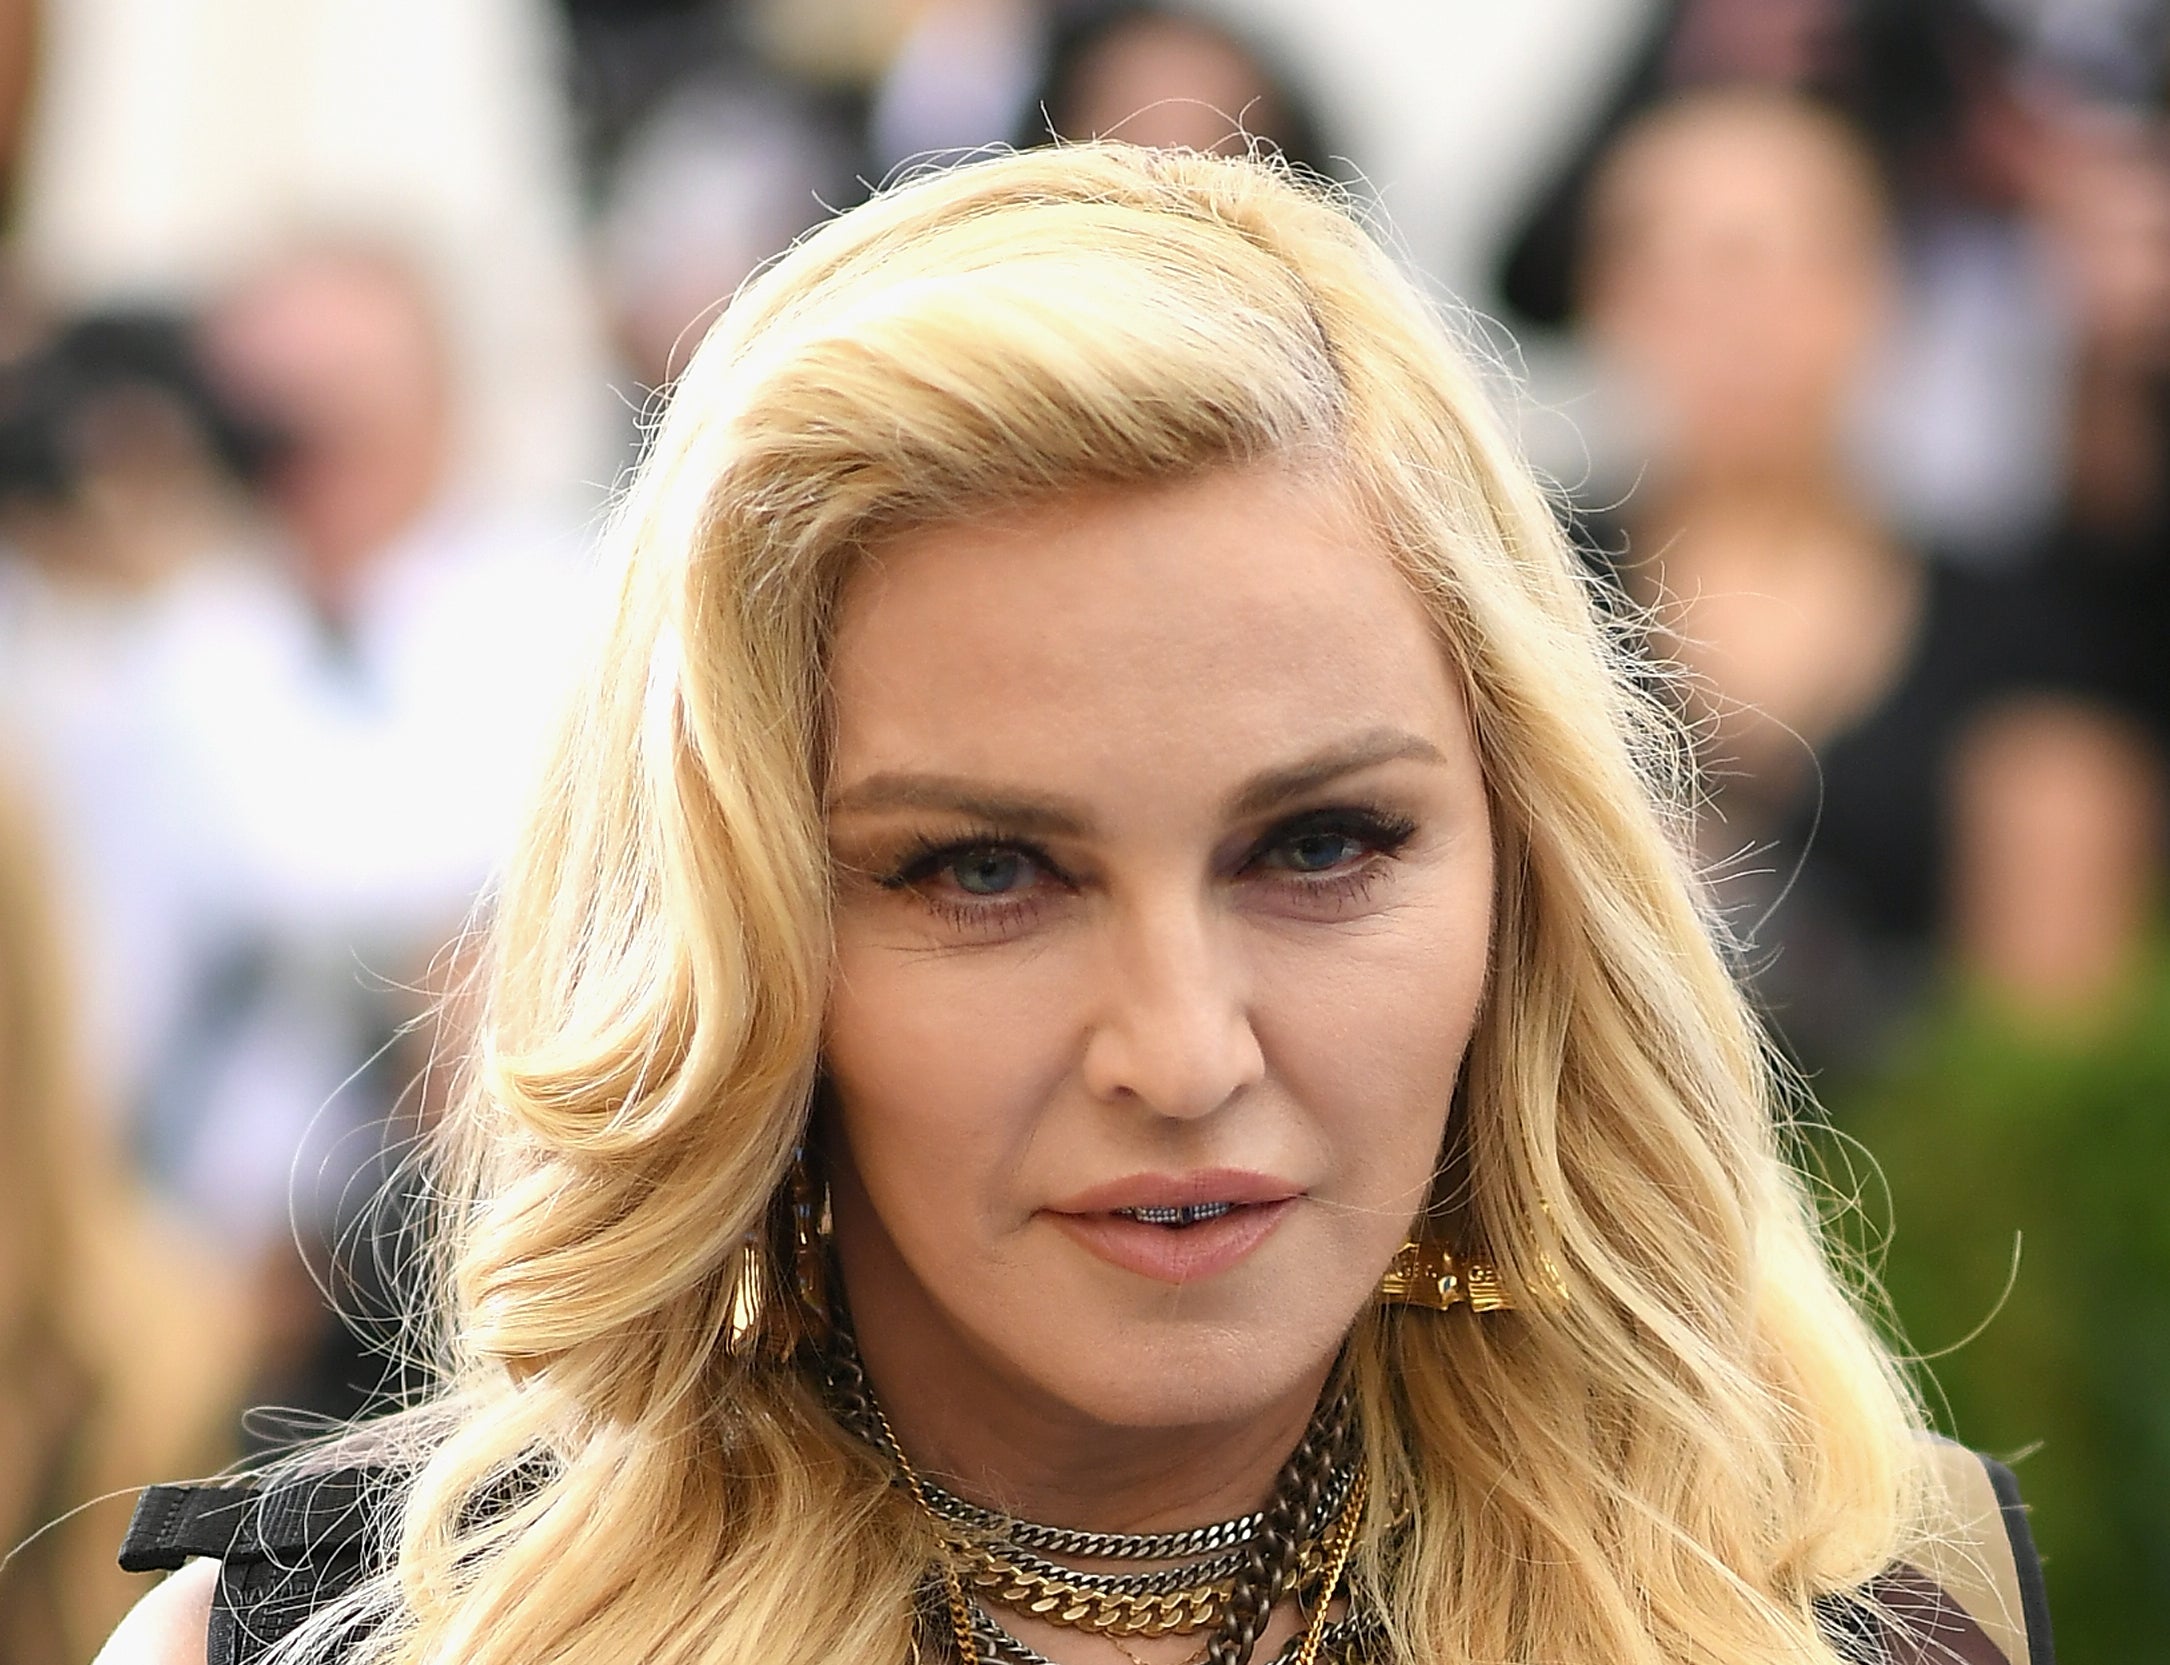 Madonna is still under medical care, her tour manager said